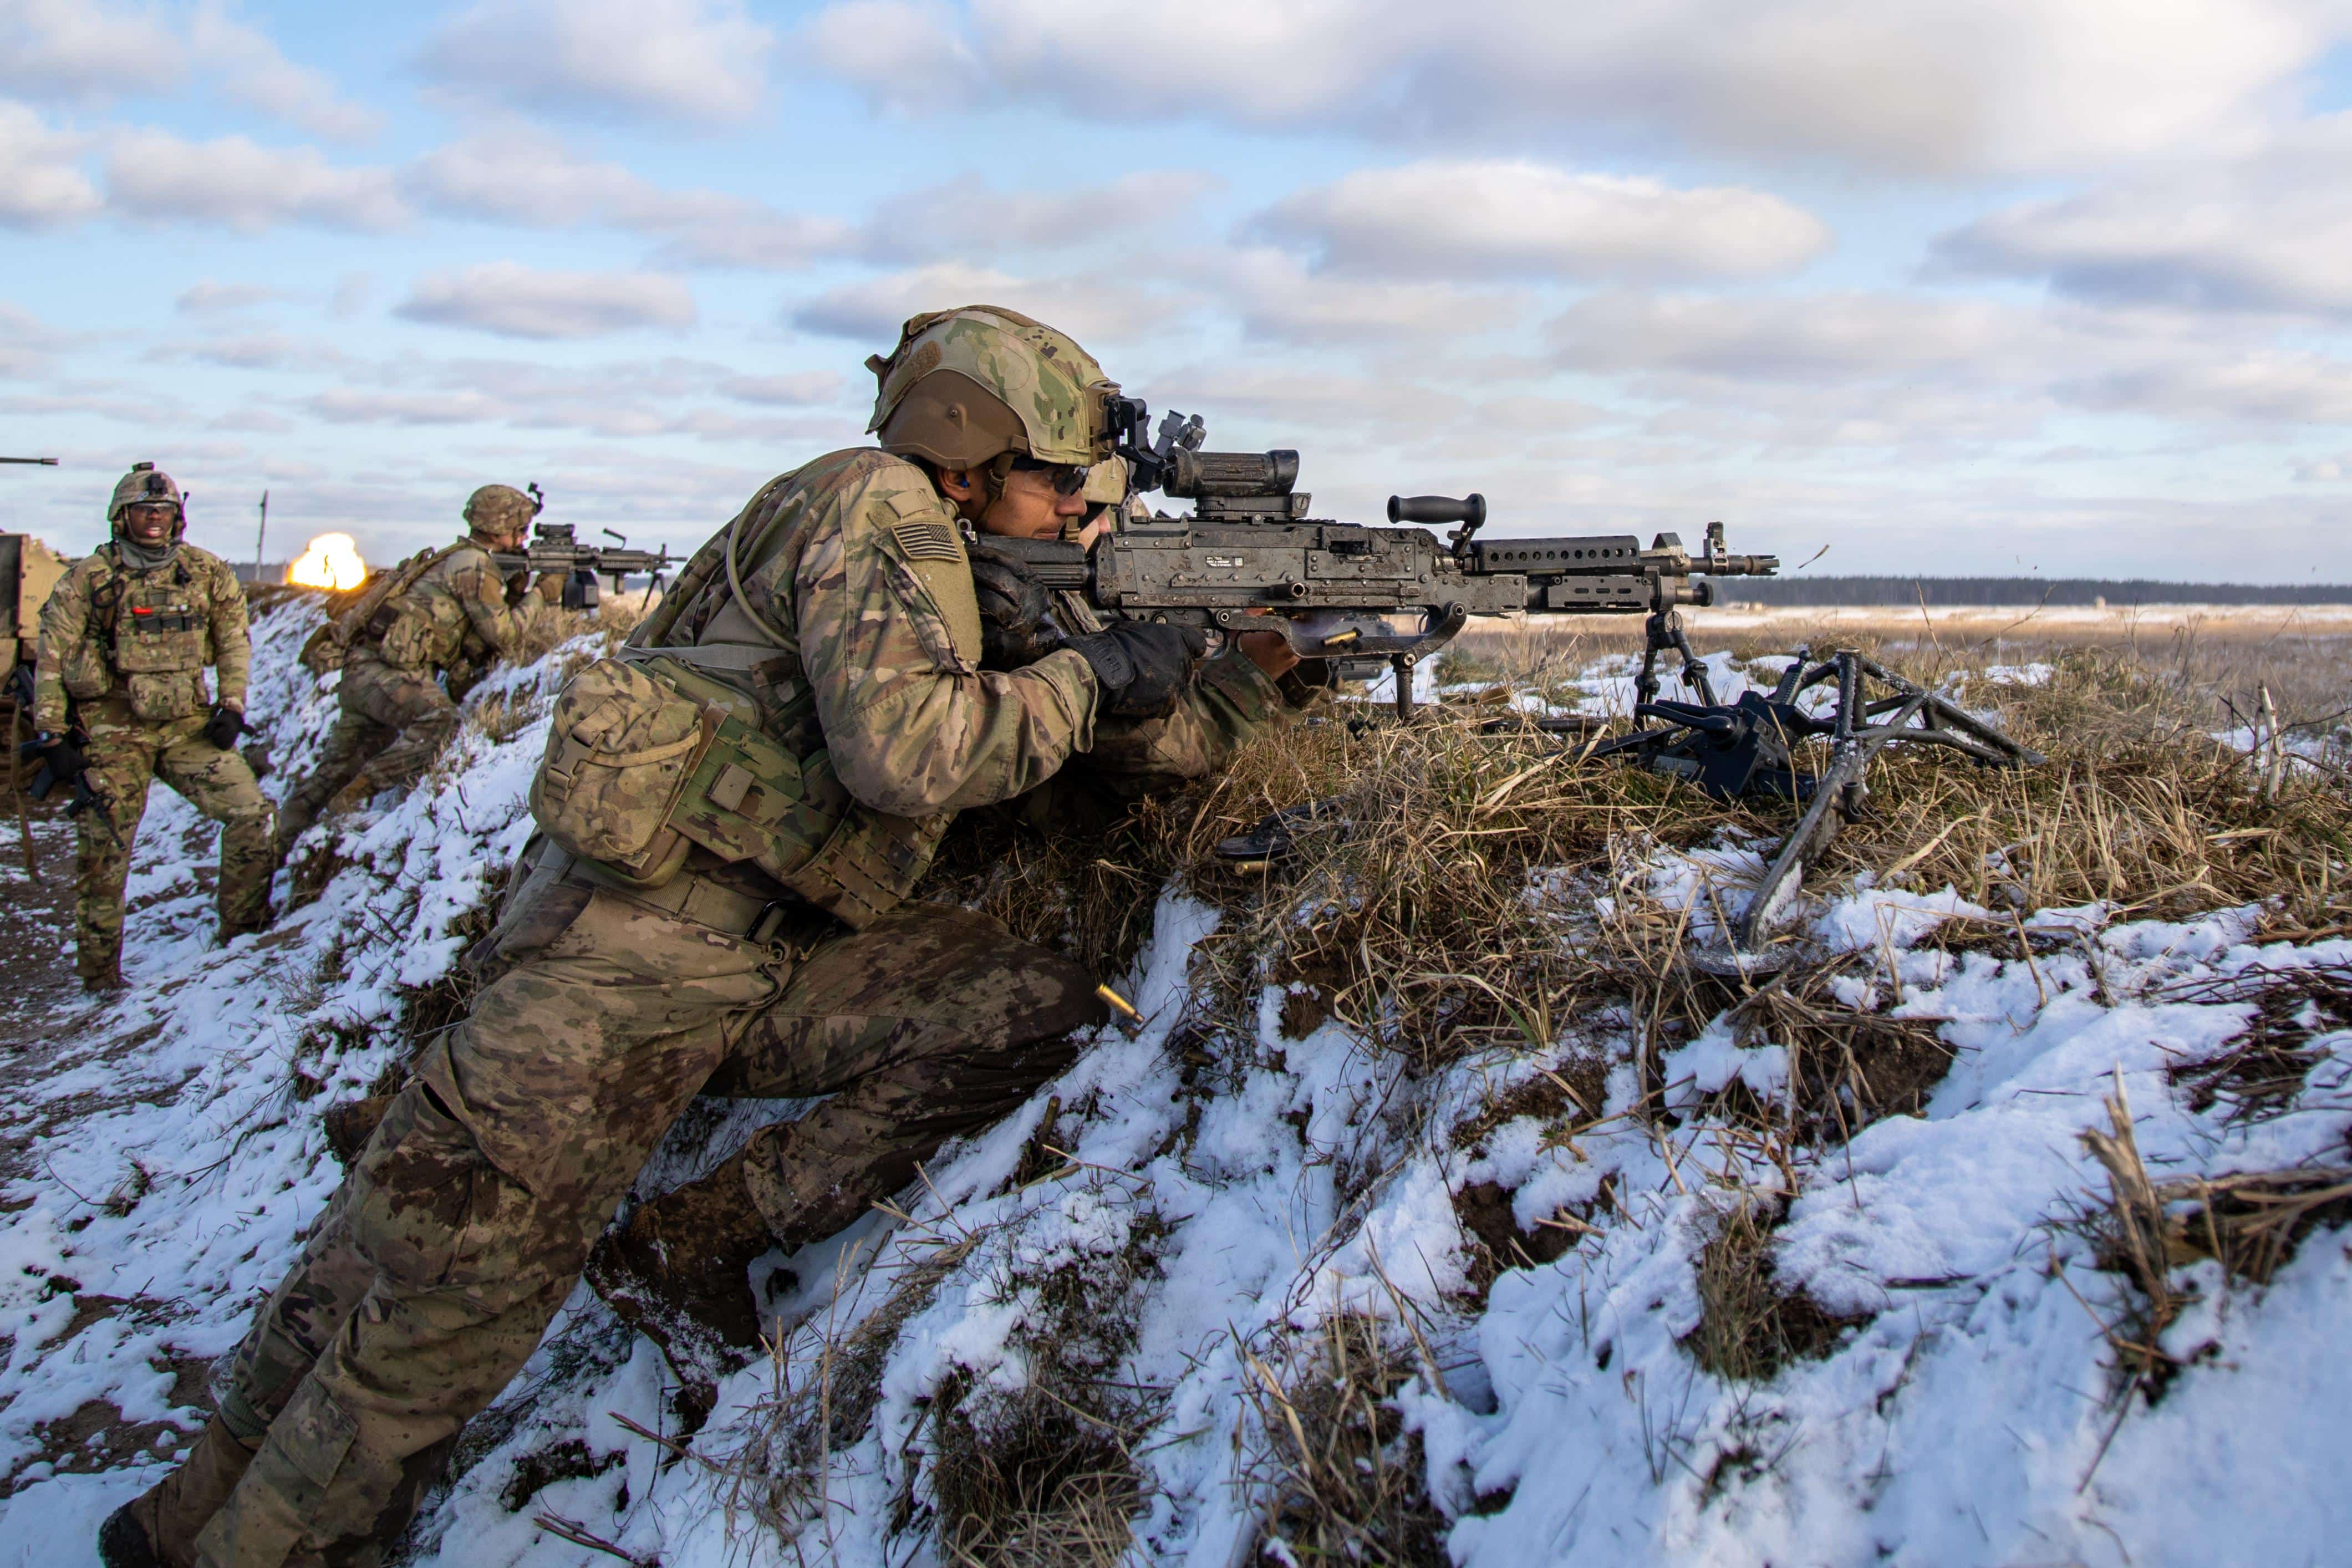 From left, U.S. Army Staff Sgt. Ramaud M. Pugh, an infantry squad leader, Pfc. Ryan M. Lofts and Spc. Payton G. Allen both infantry machine gunners, all assigned to NATO eFP Battle Group Poland, 2nd Armored Brigade Combat Team, 1st Cavalry Division, supporting the 4th Infantry Division